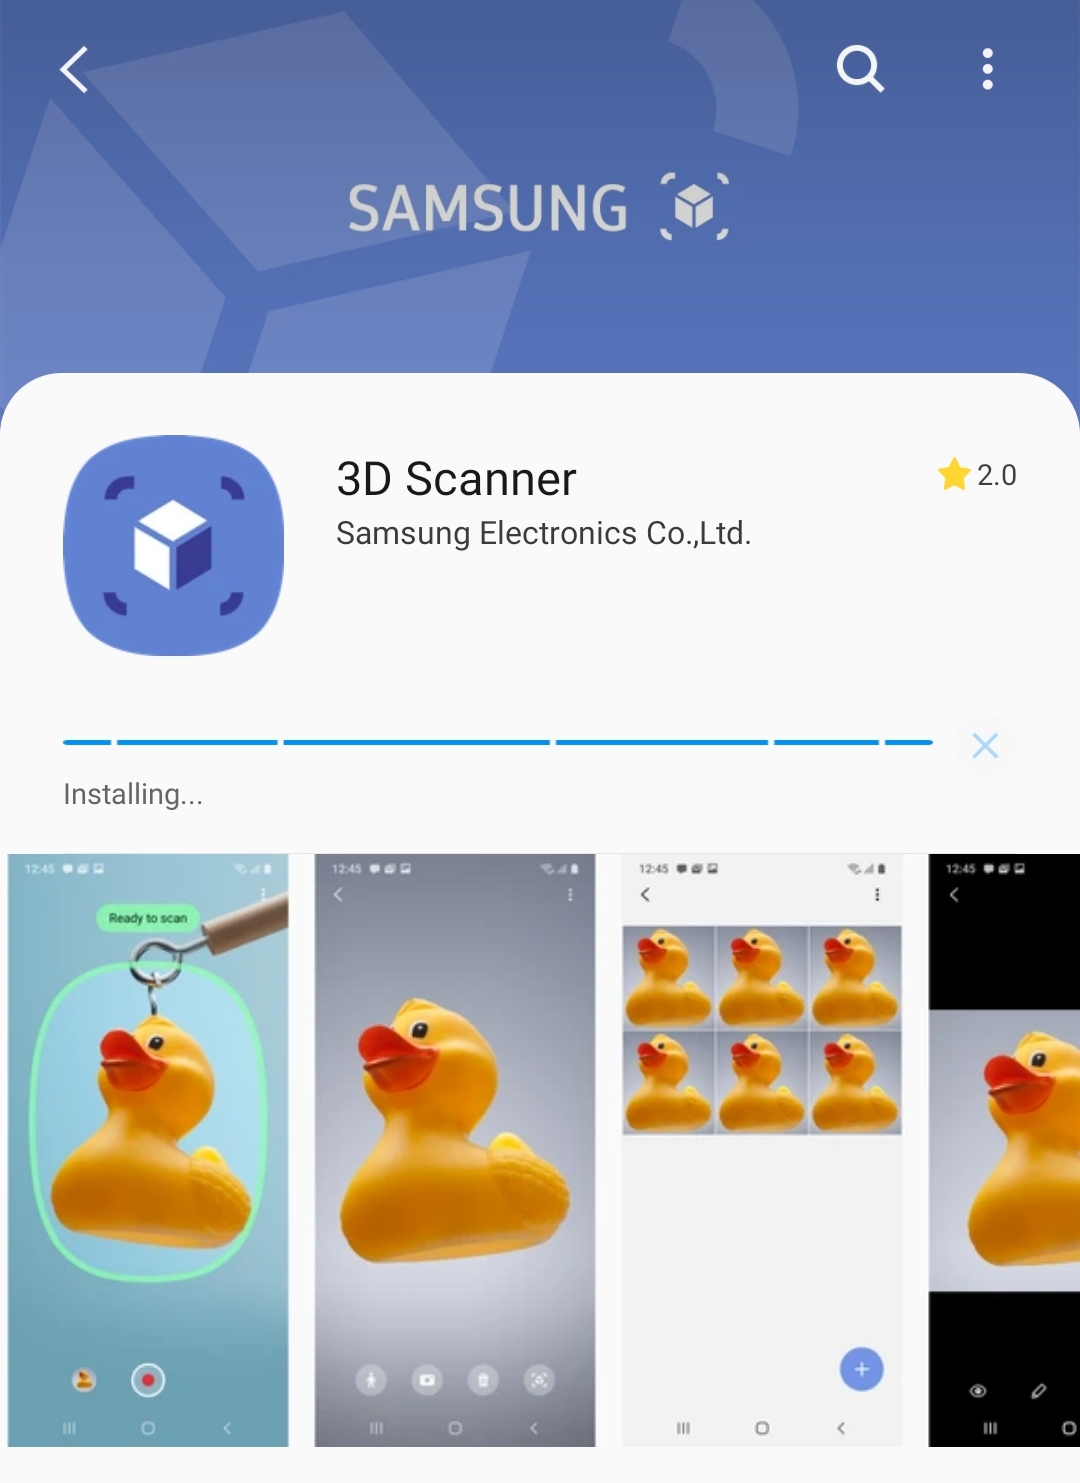 Samsung's Galaxy Note 10+ 3D Scanner is now available for download